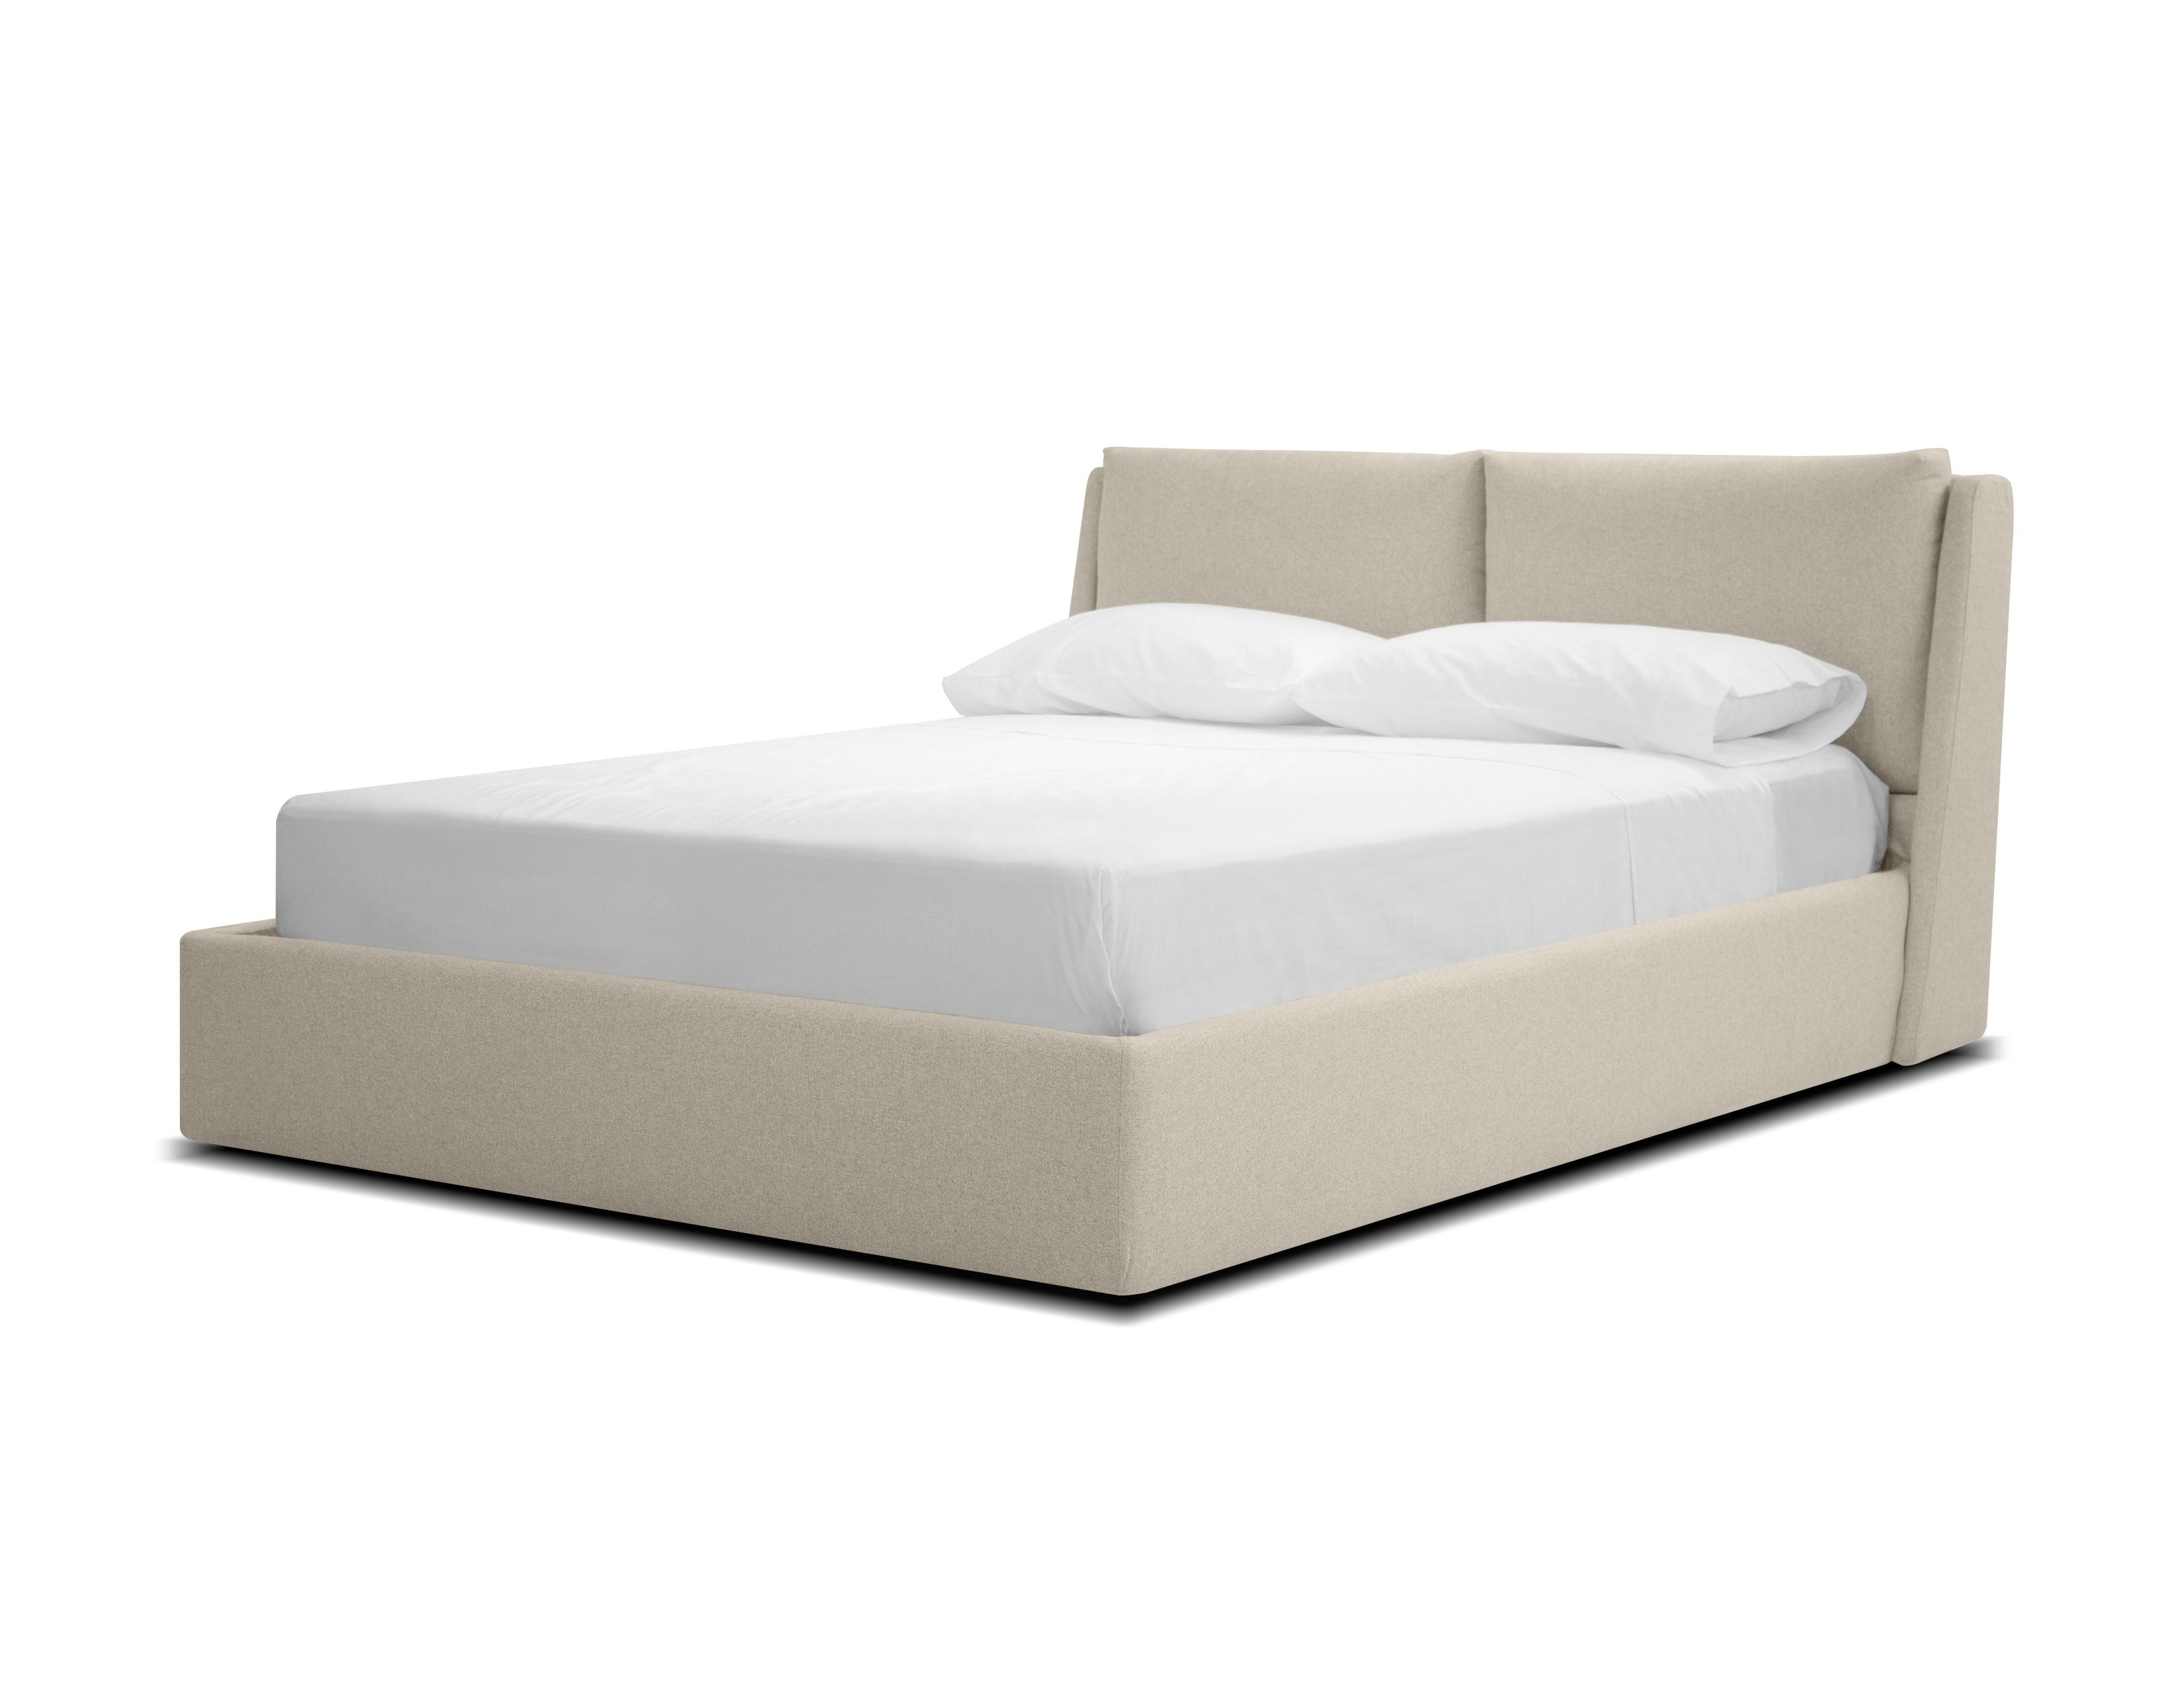 CONTINENTAL Storage Bed in Stone Wheat Tweed